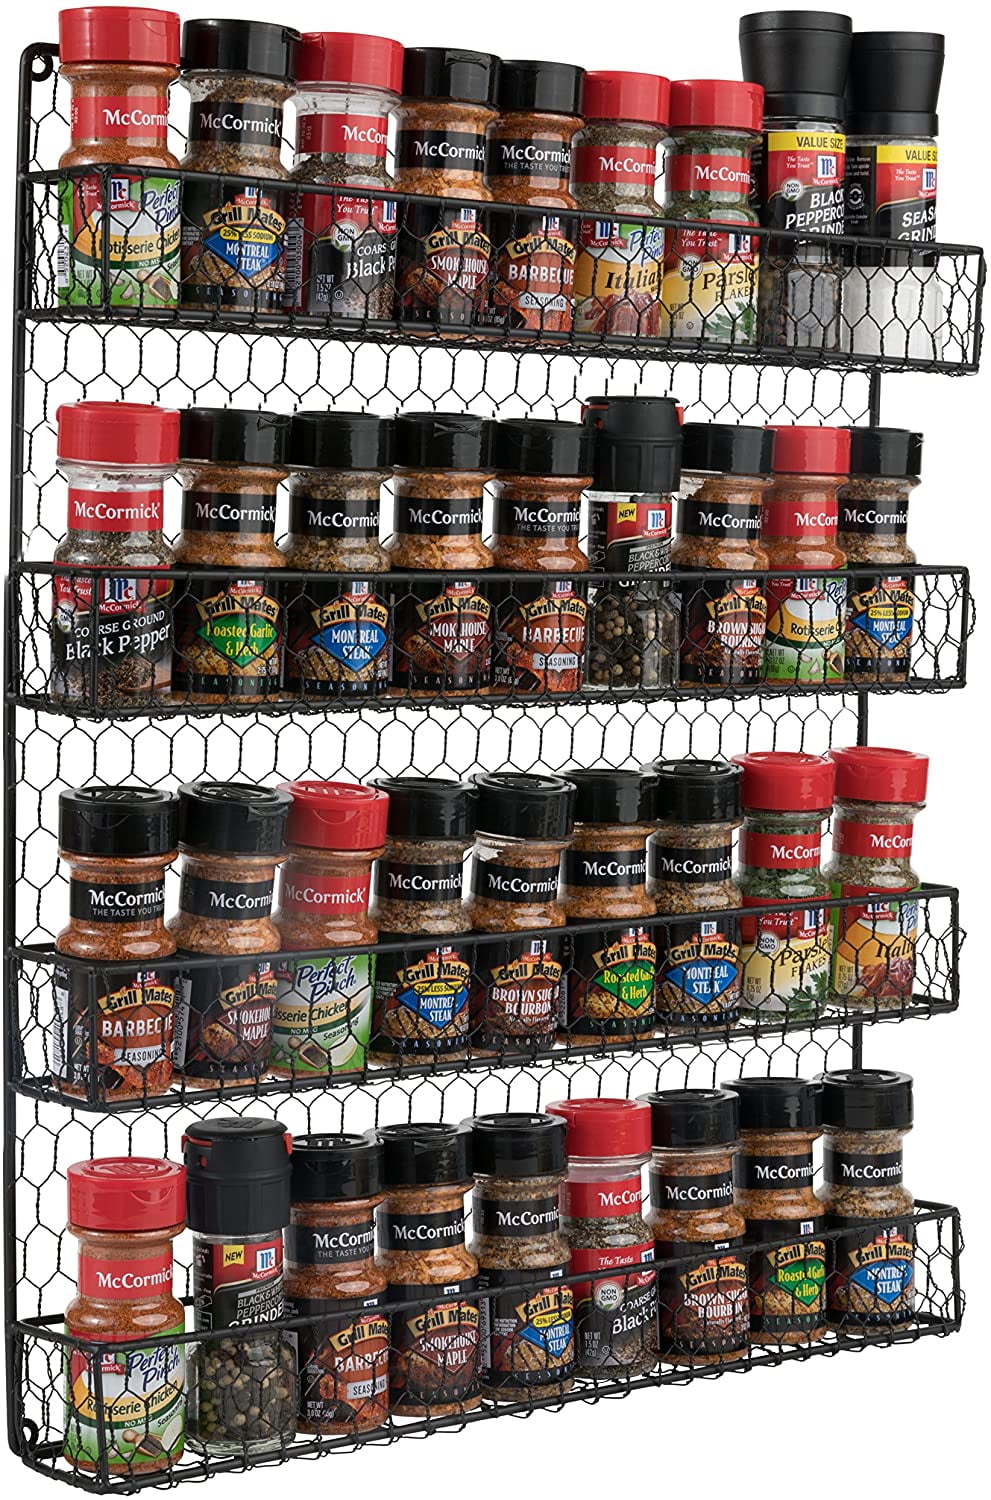  Bunoxea Spice Rack wall mounted 4 Pack, Space-Saving